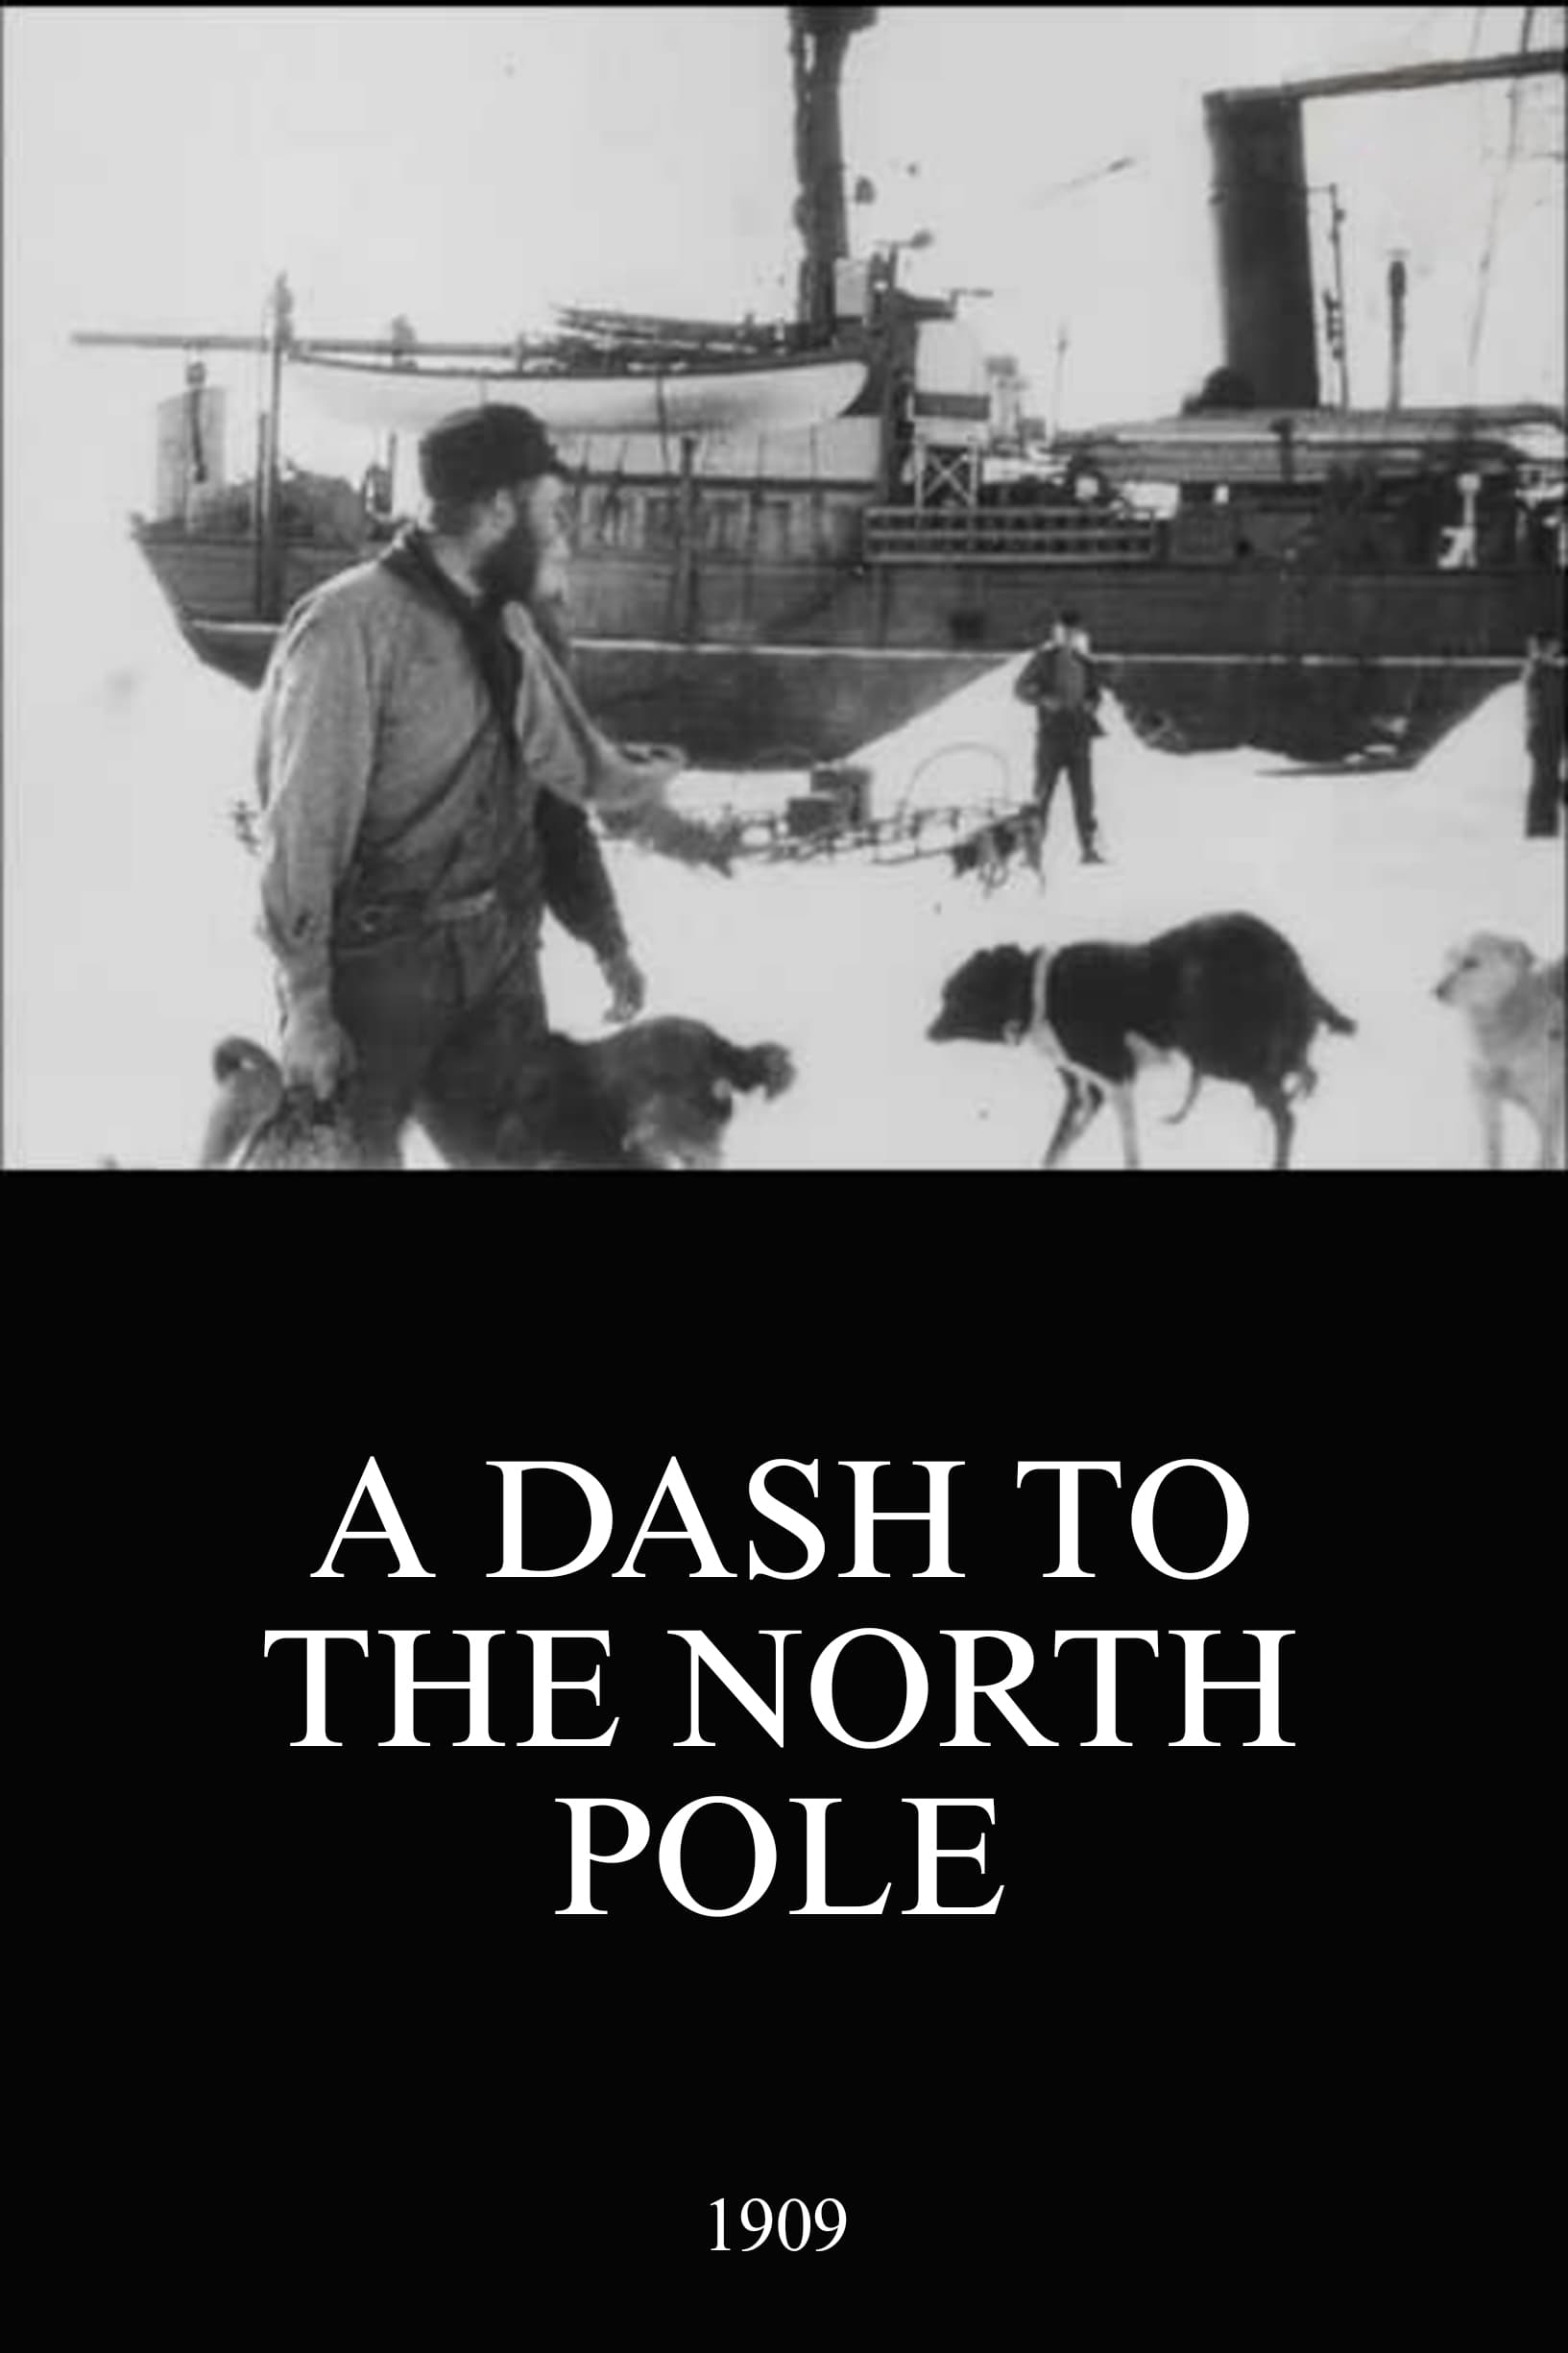 A Dash to the North Pole